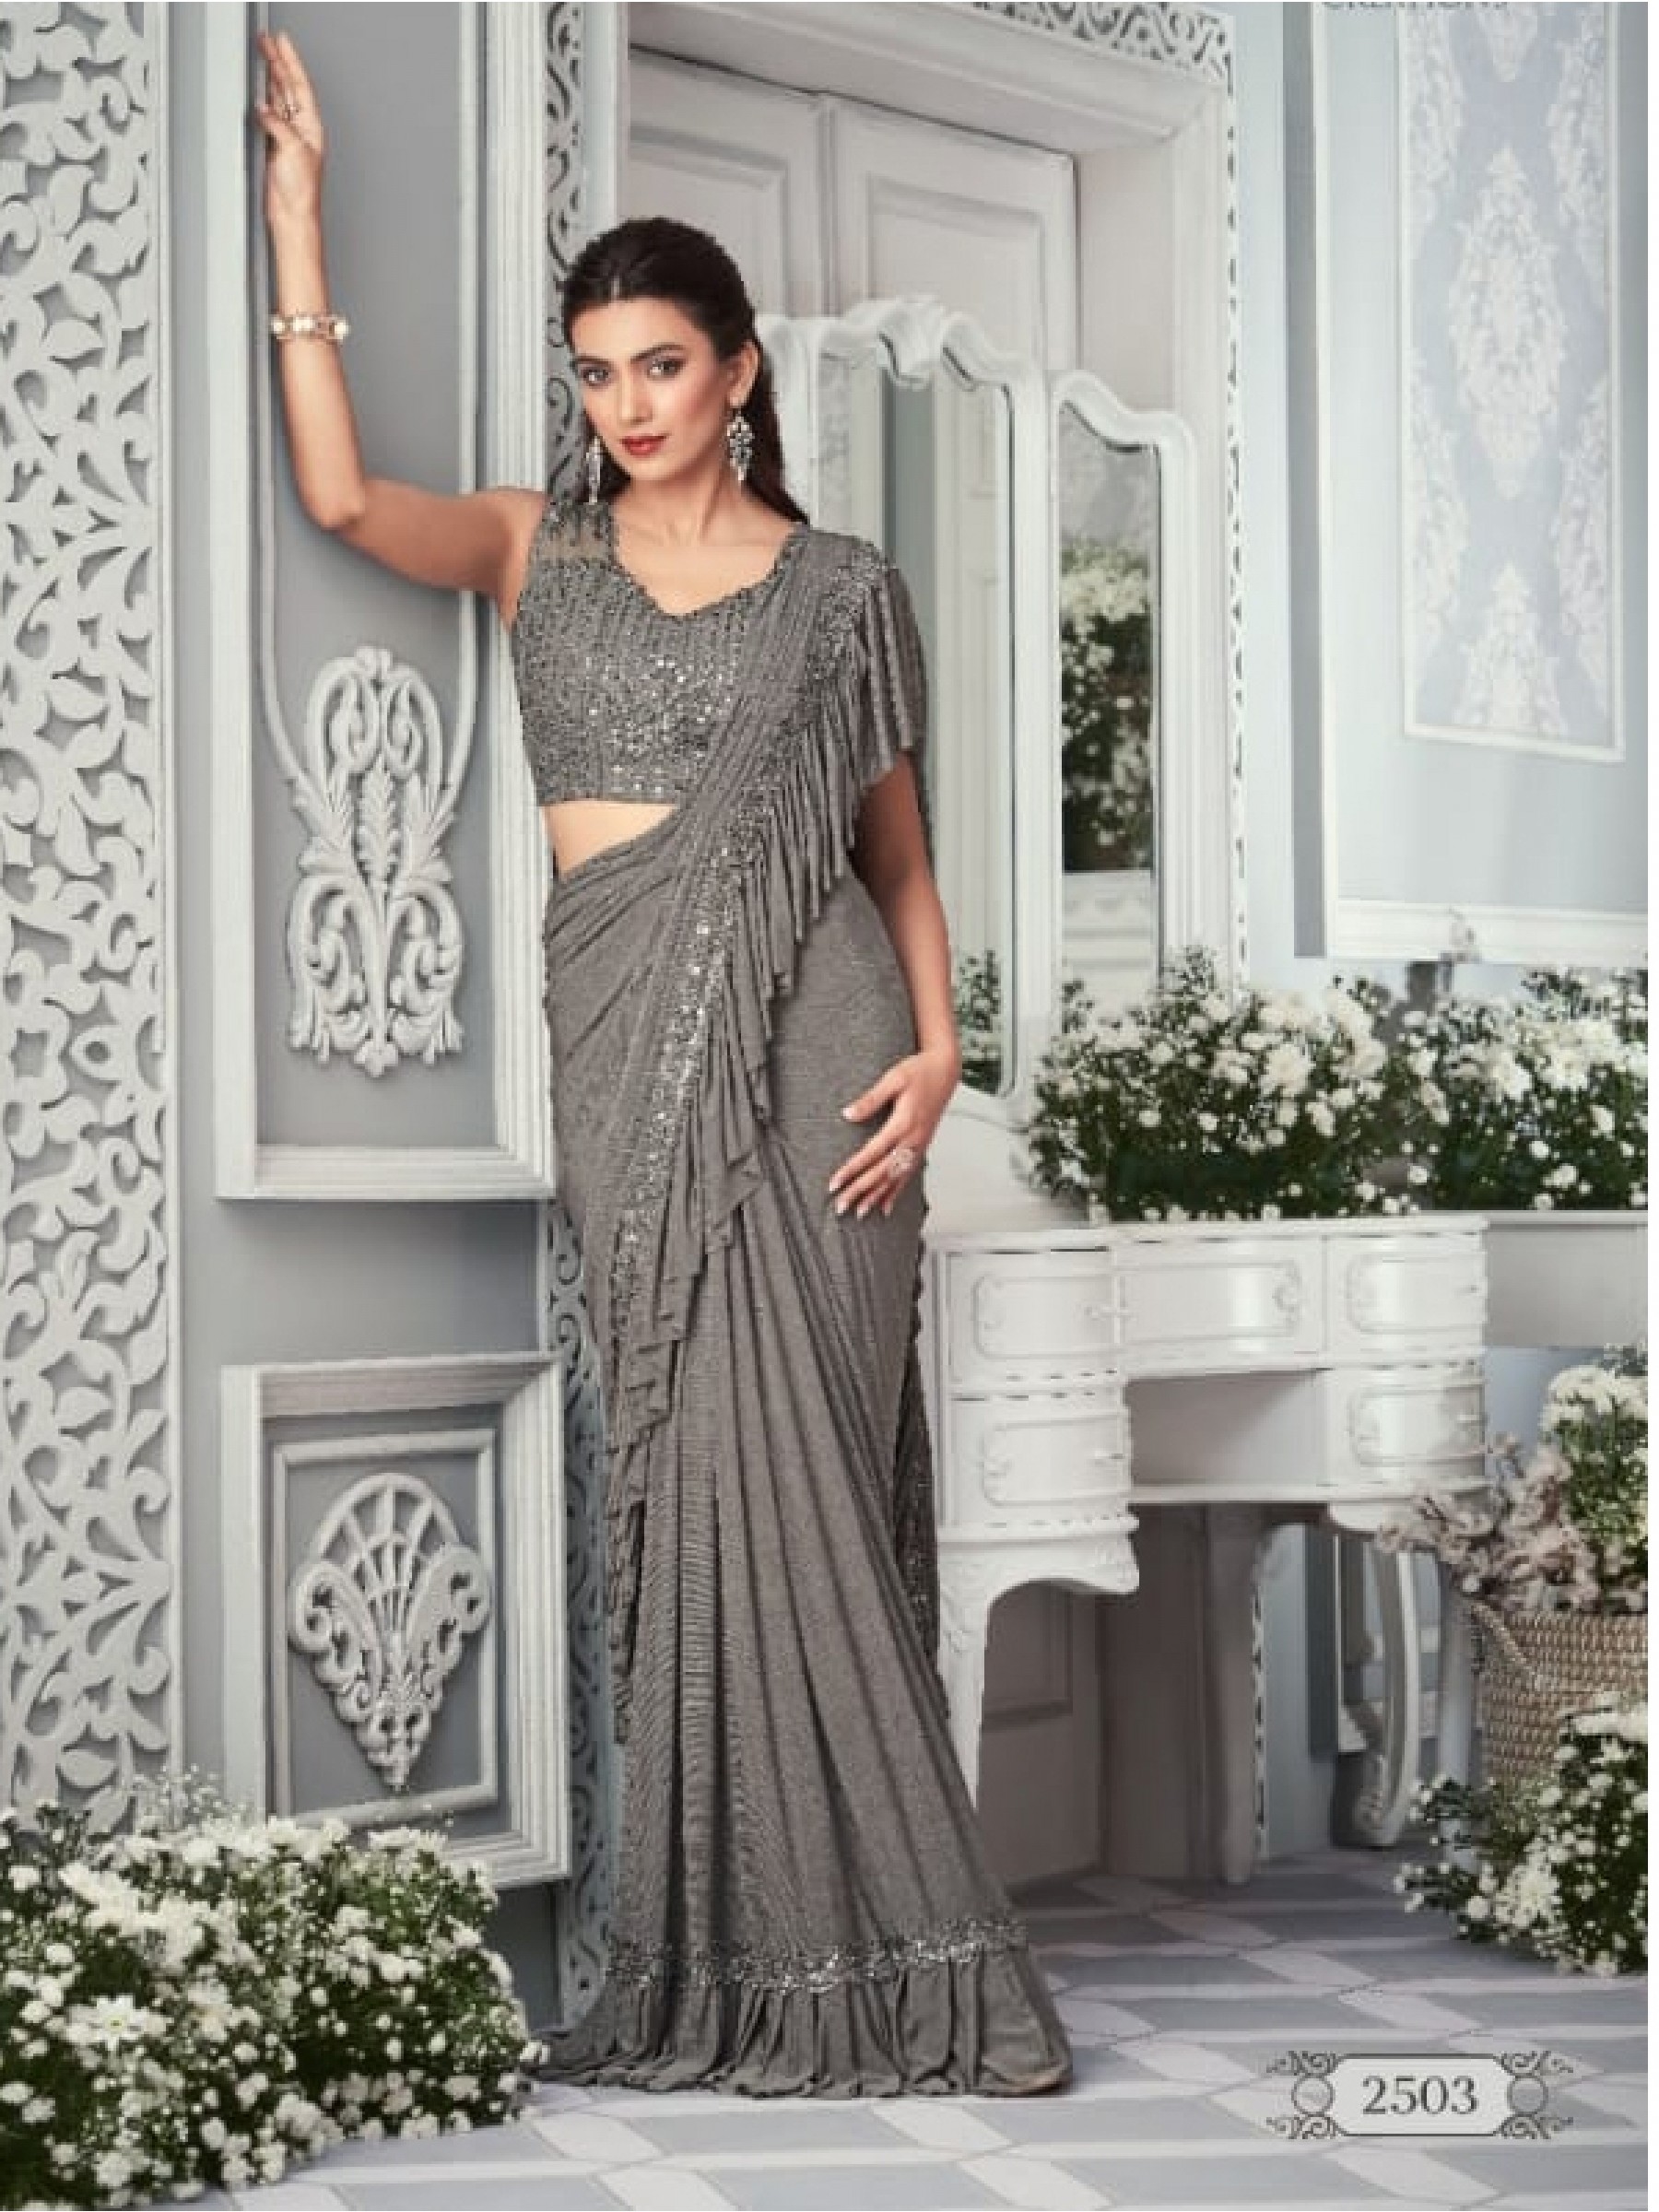 Laycra Party Wear Saree In Grey Color With Embroidery Work